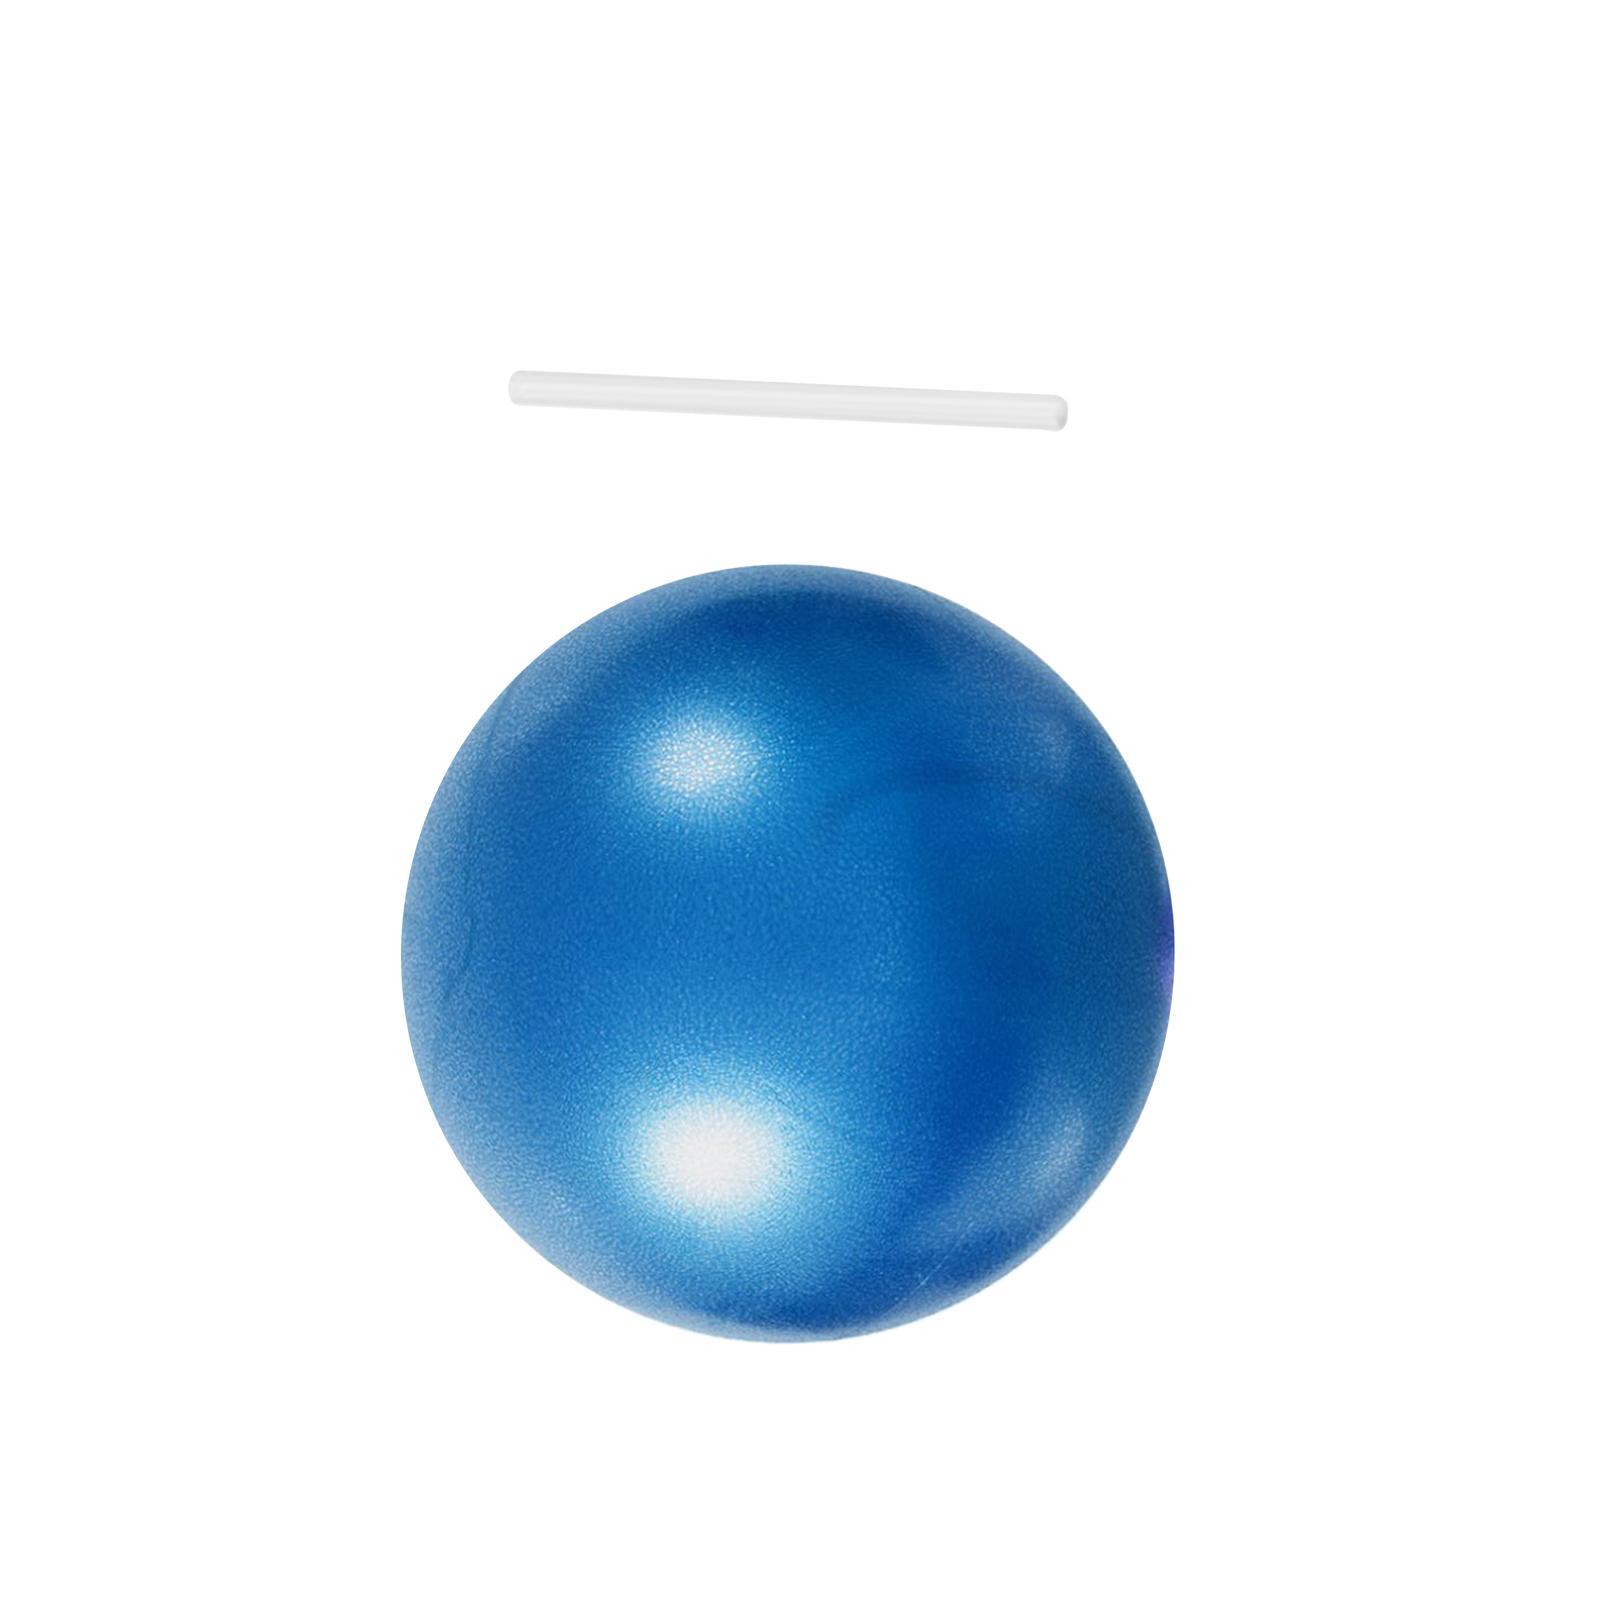 Small Pilates Ball Heavy Duty Workout Ball for Home Gym Balance